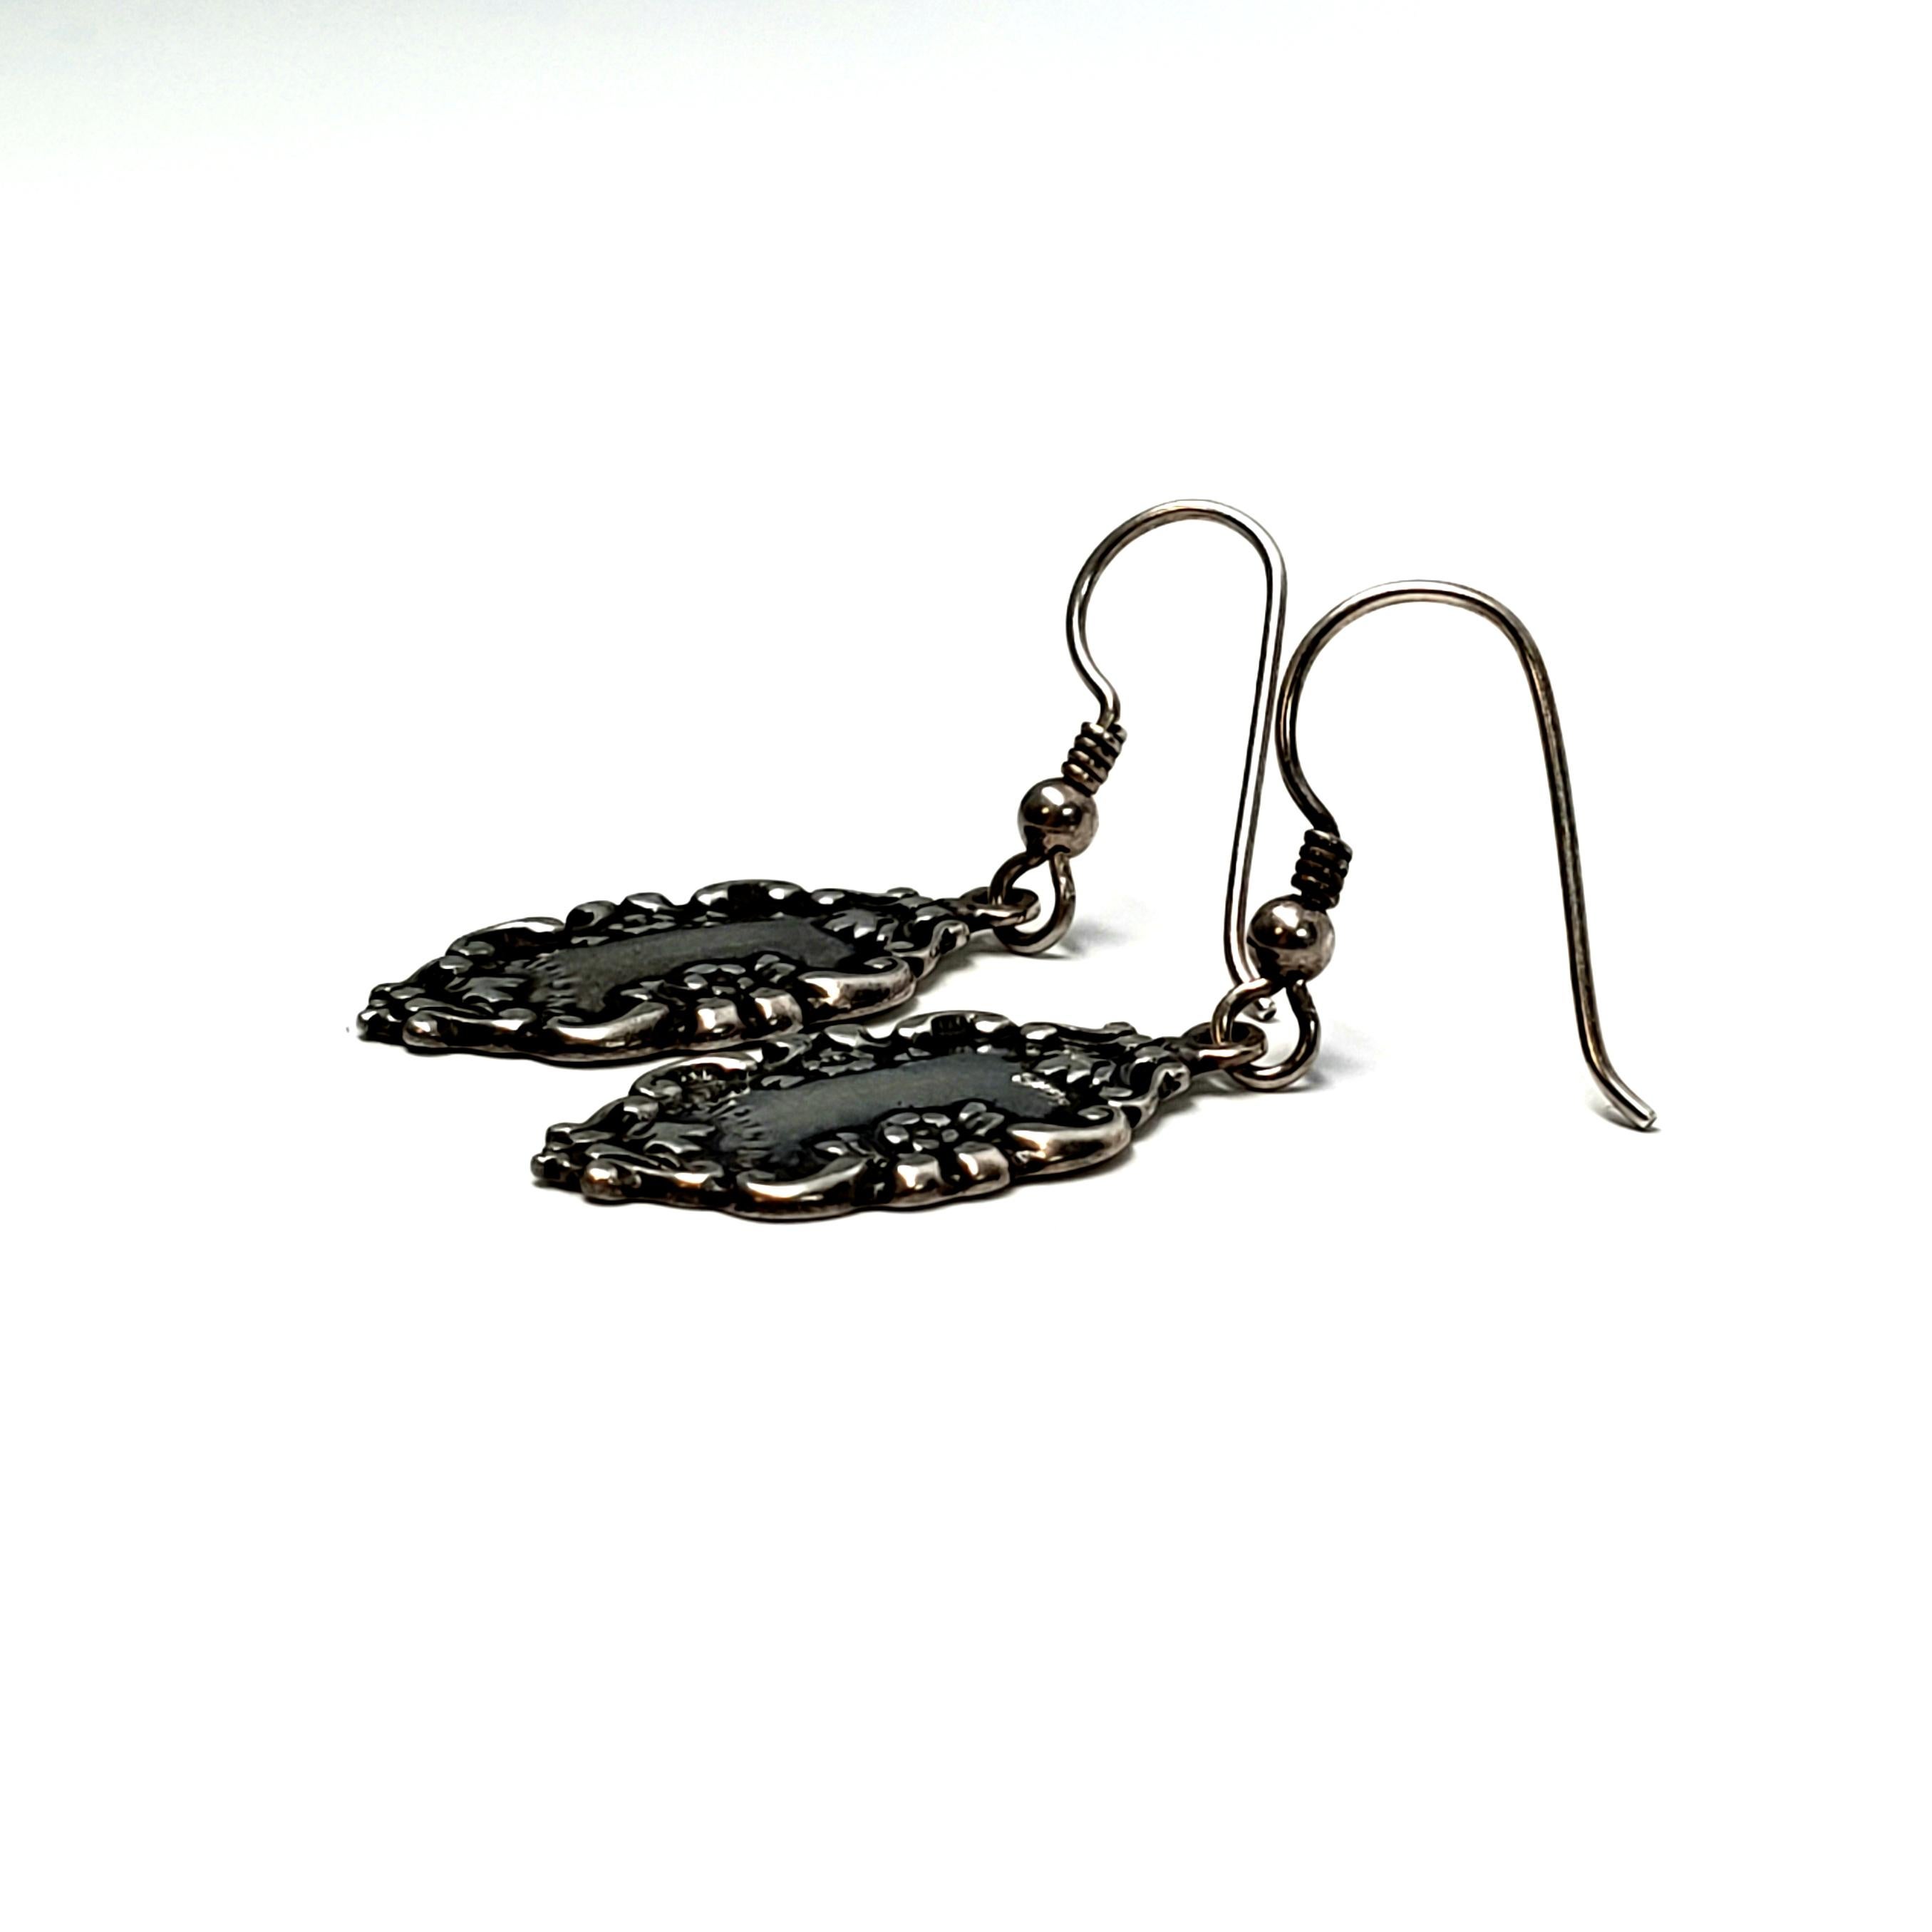 Vintage sterling silver dangle earrings by Foree.

Beautiful example of the repousse technique.

Measures 1 5/8